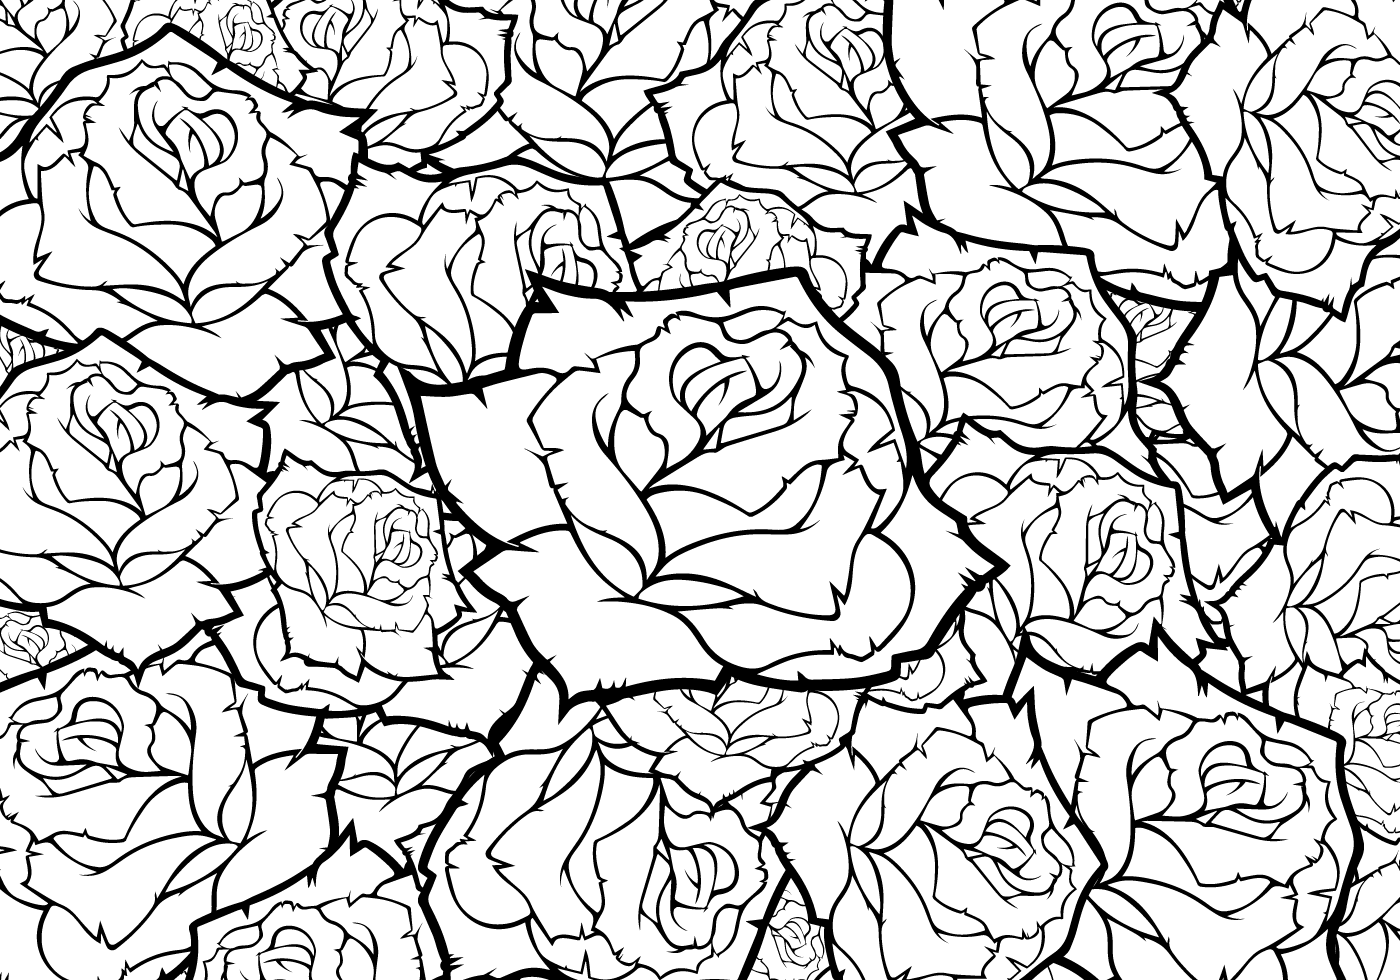 Download Rose Flower Vector Background Black And White - Download ...